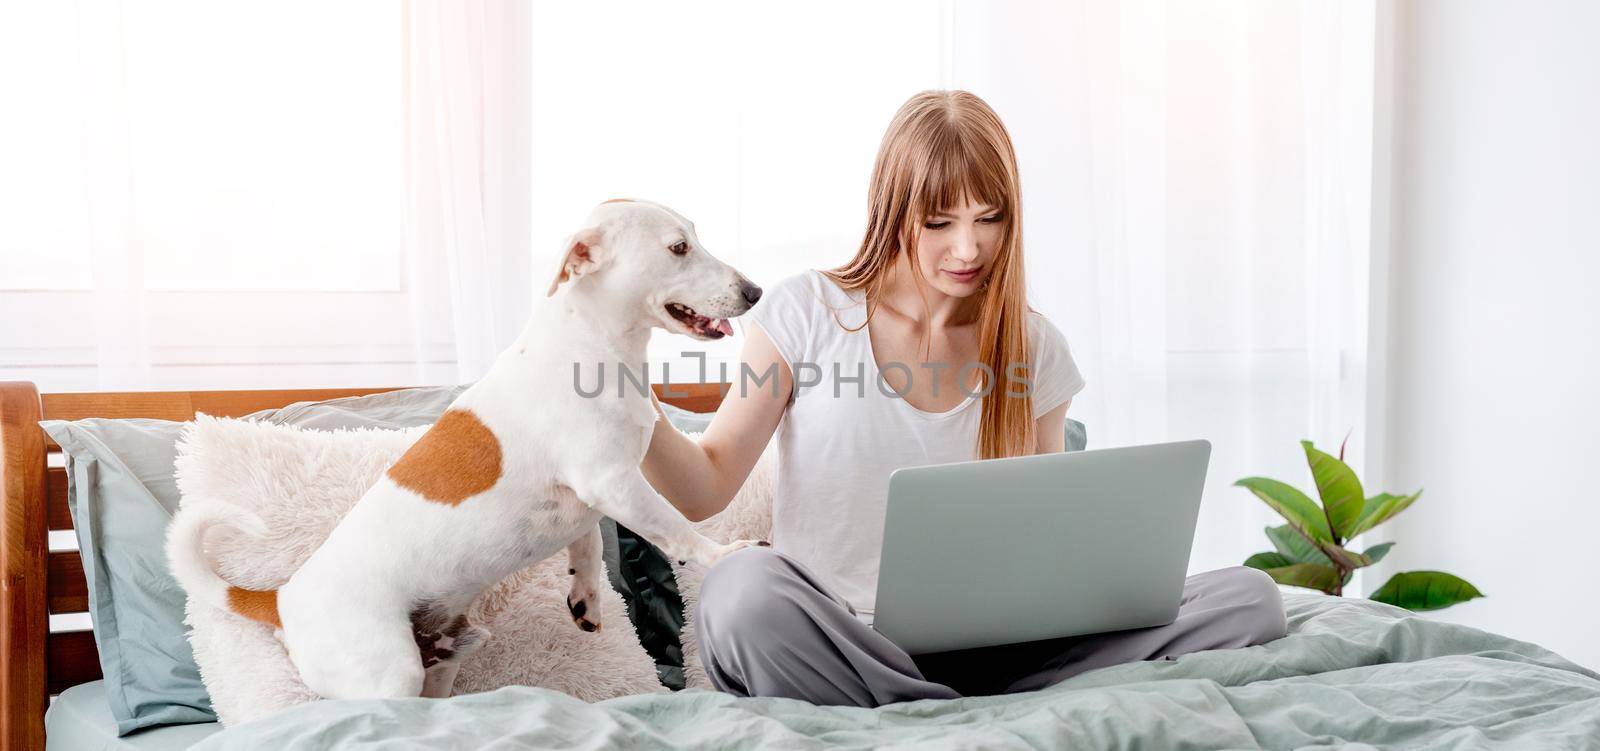 Attractive girl sitting in the bed and looking at the screen of laptop and her cute dog standing close to her. Young beautiful woman with pet and notebook in bedroom. Concept of remote work from home